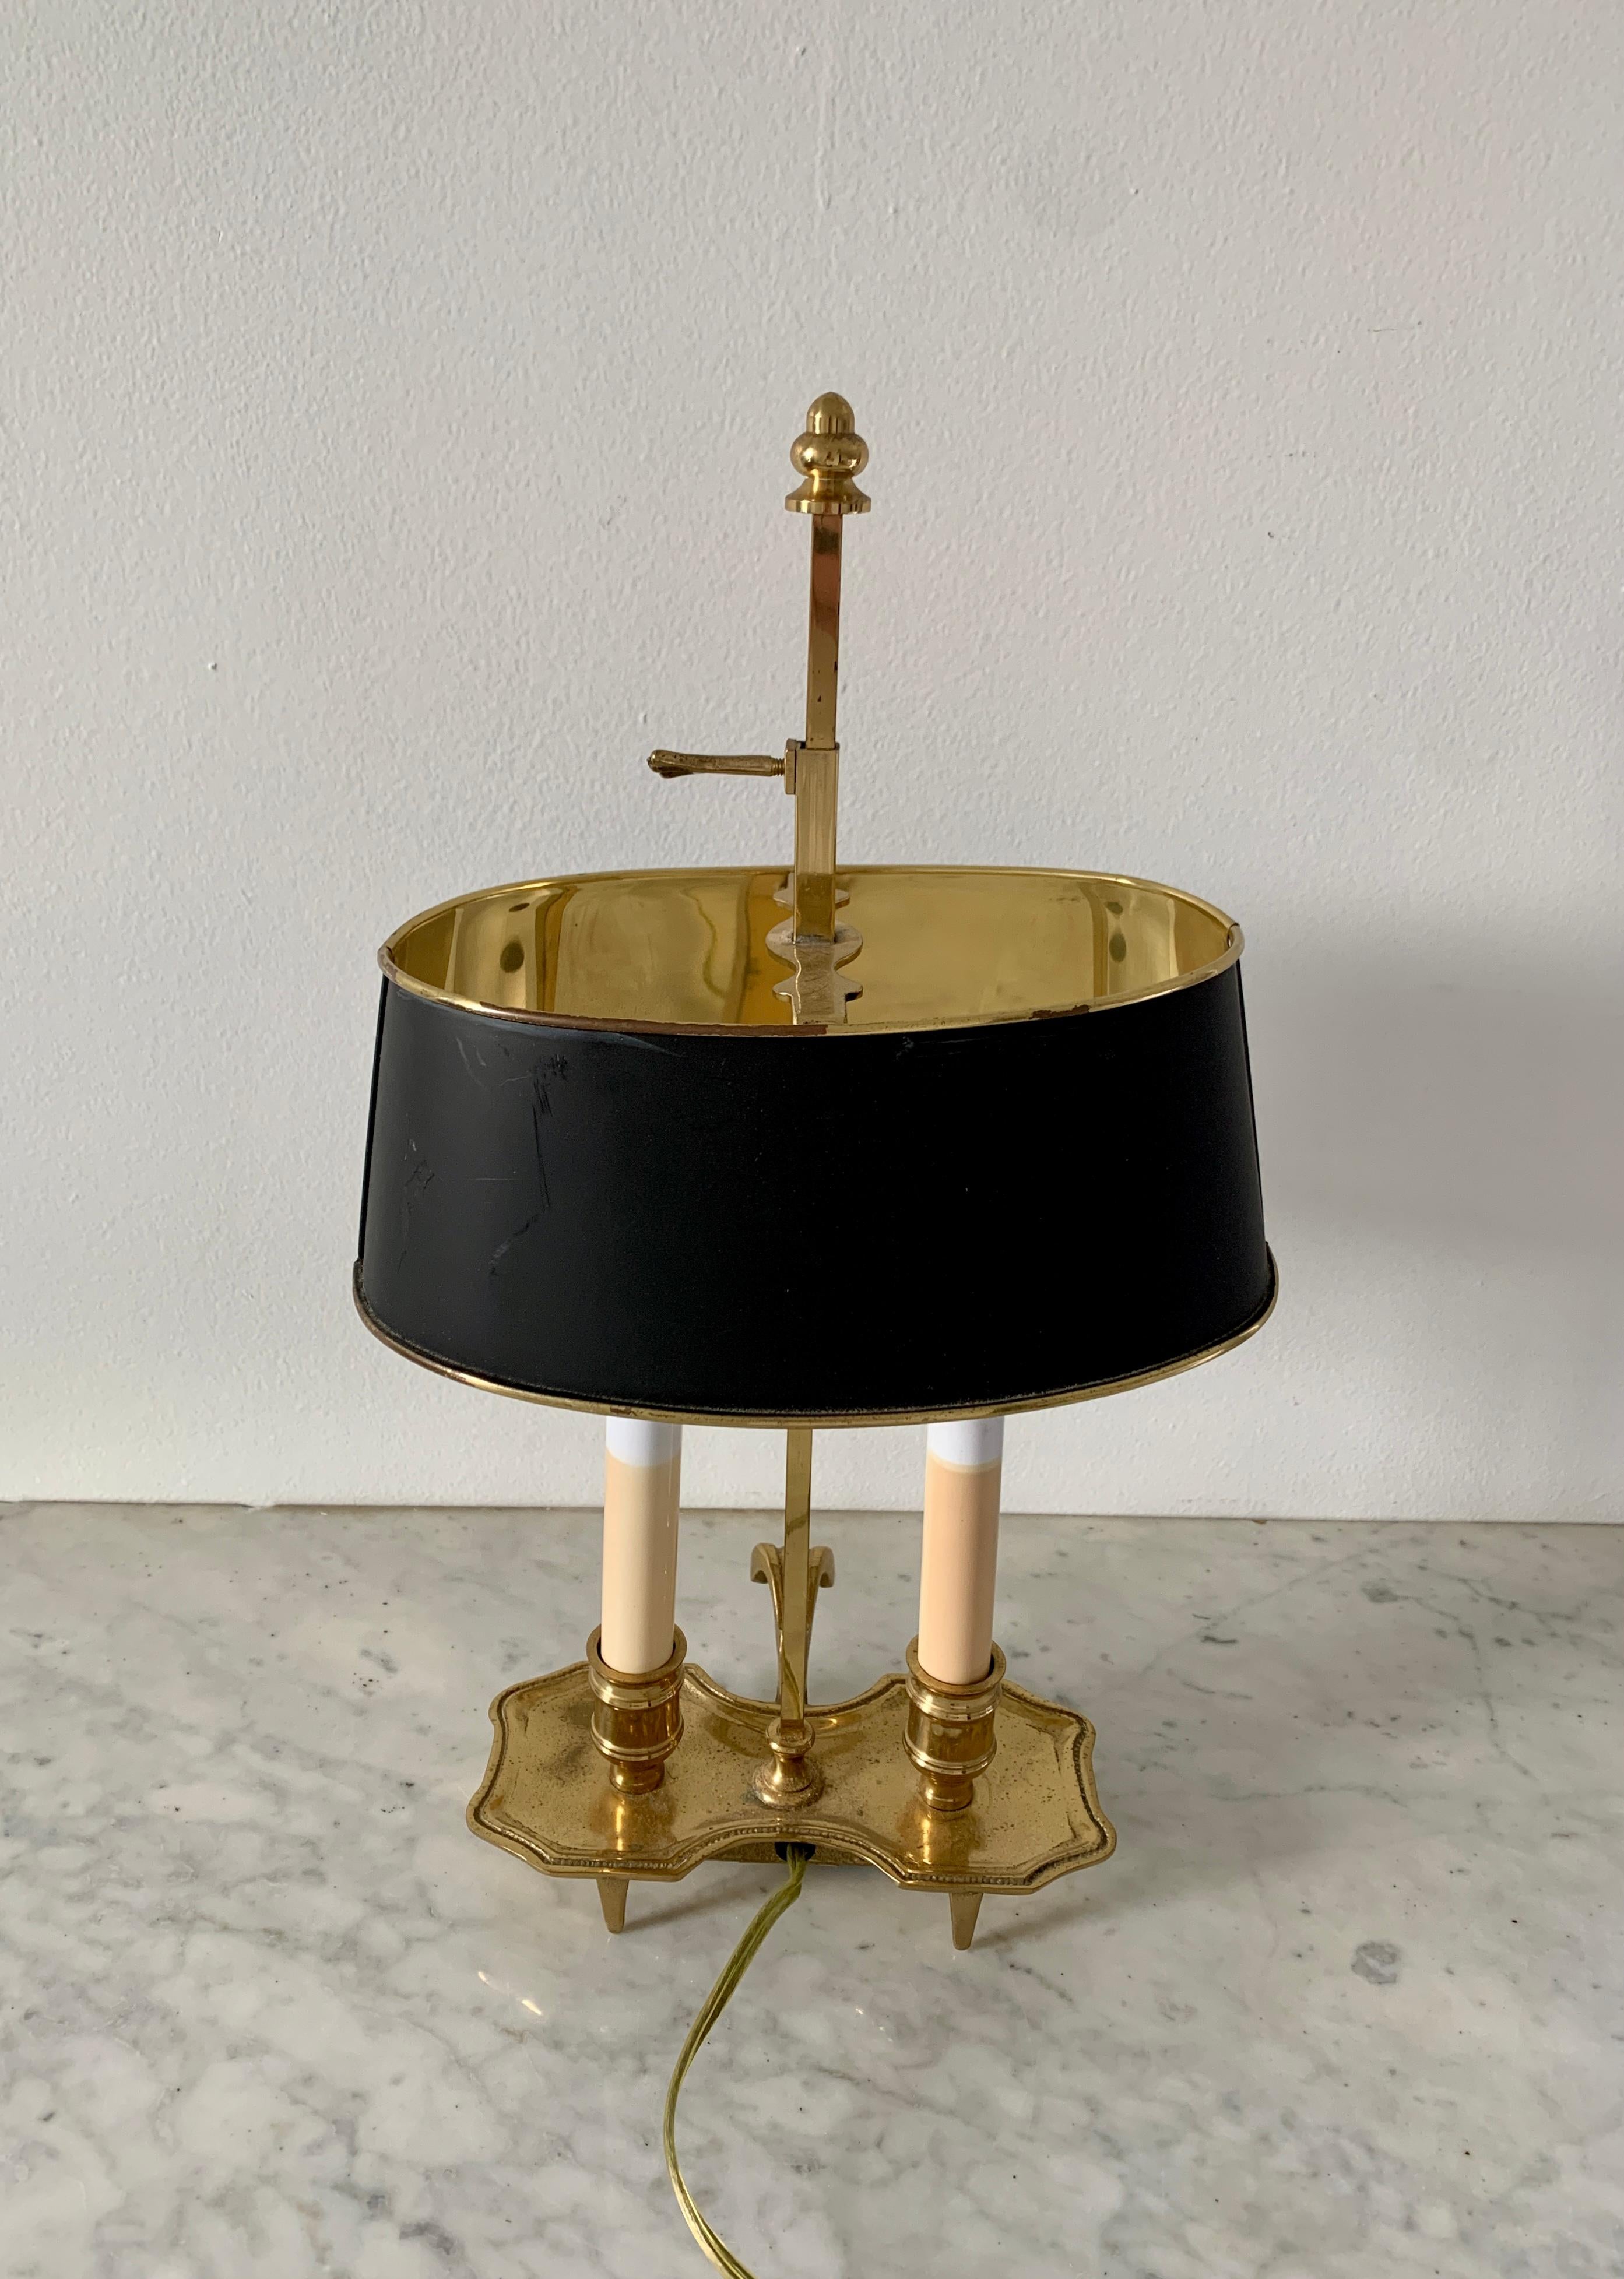 Metal Mid-20th Century Brass Bouillotte Lamp with Black Tole Shade